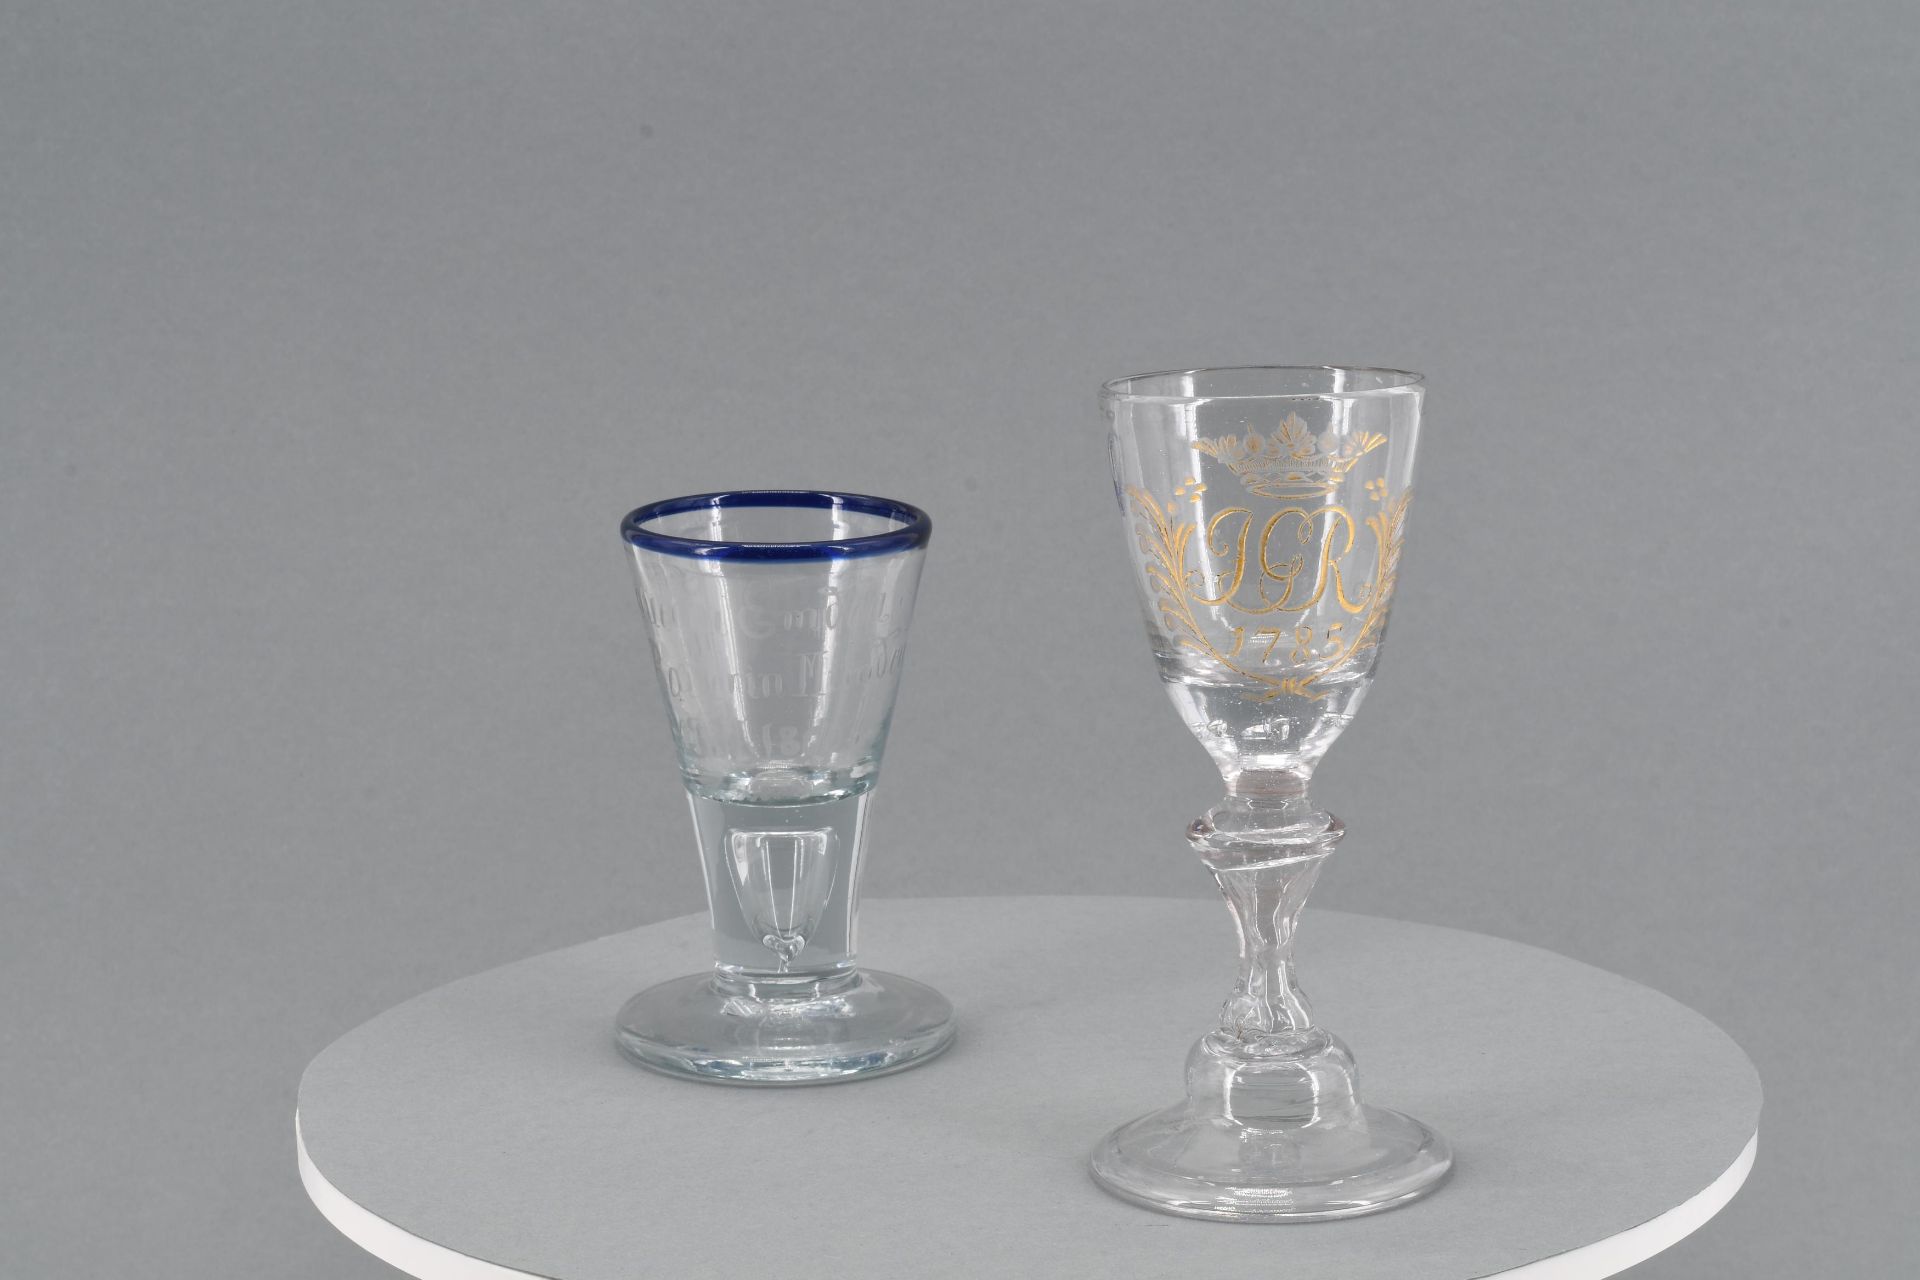 Goblet with monogram and schnapps glass with blue rim - Image 3 of 15